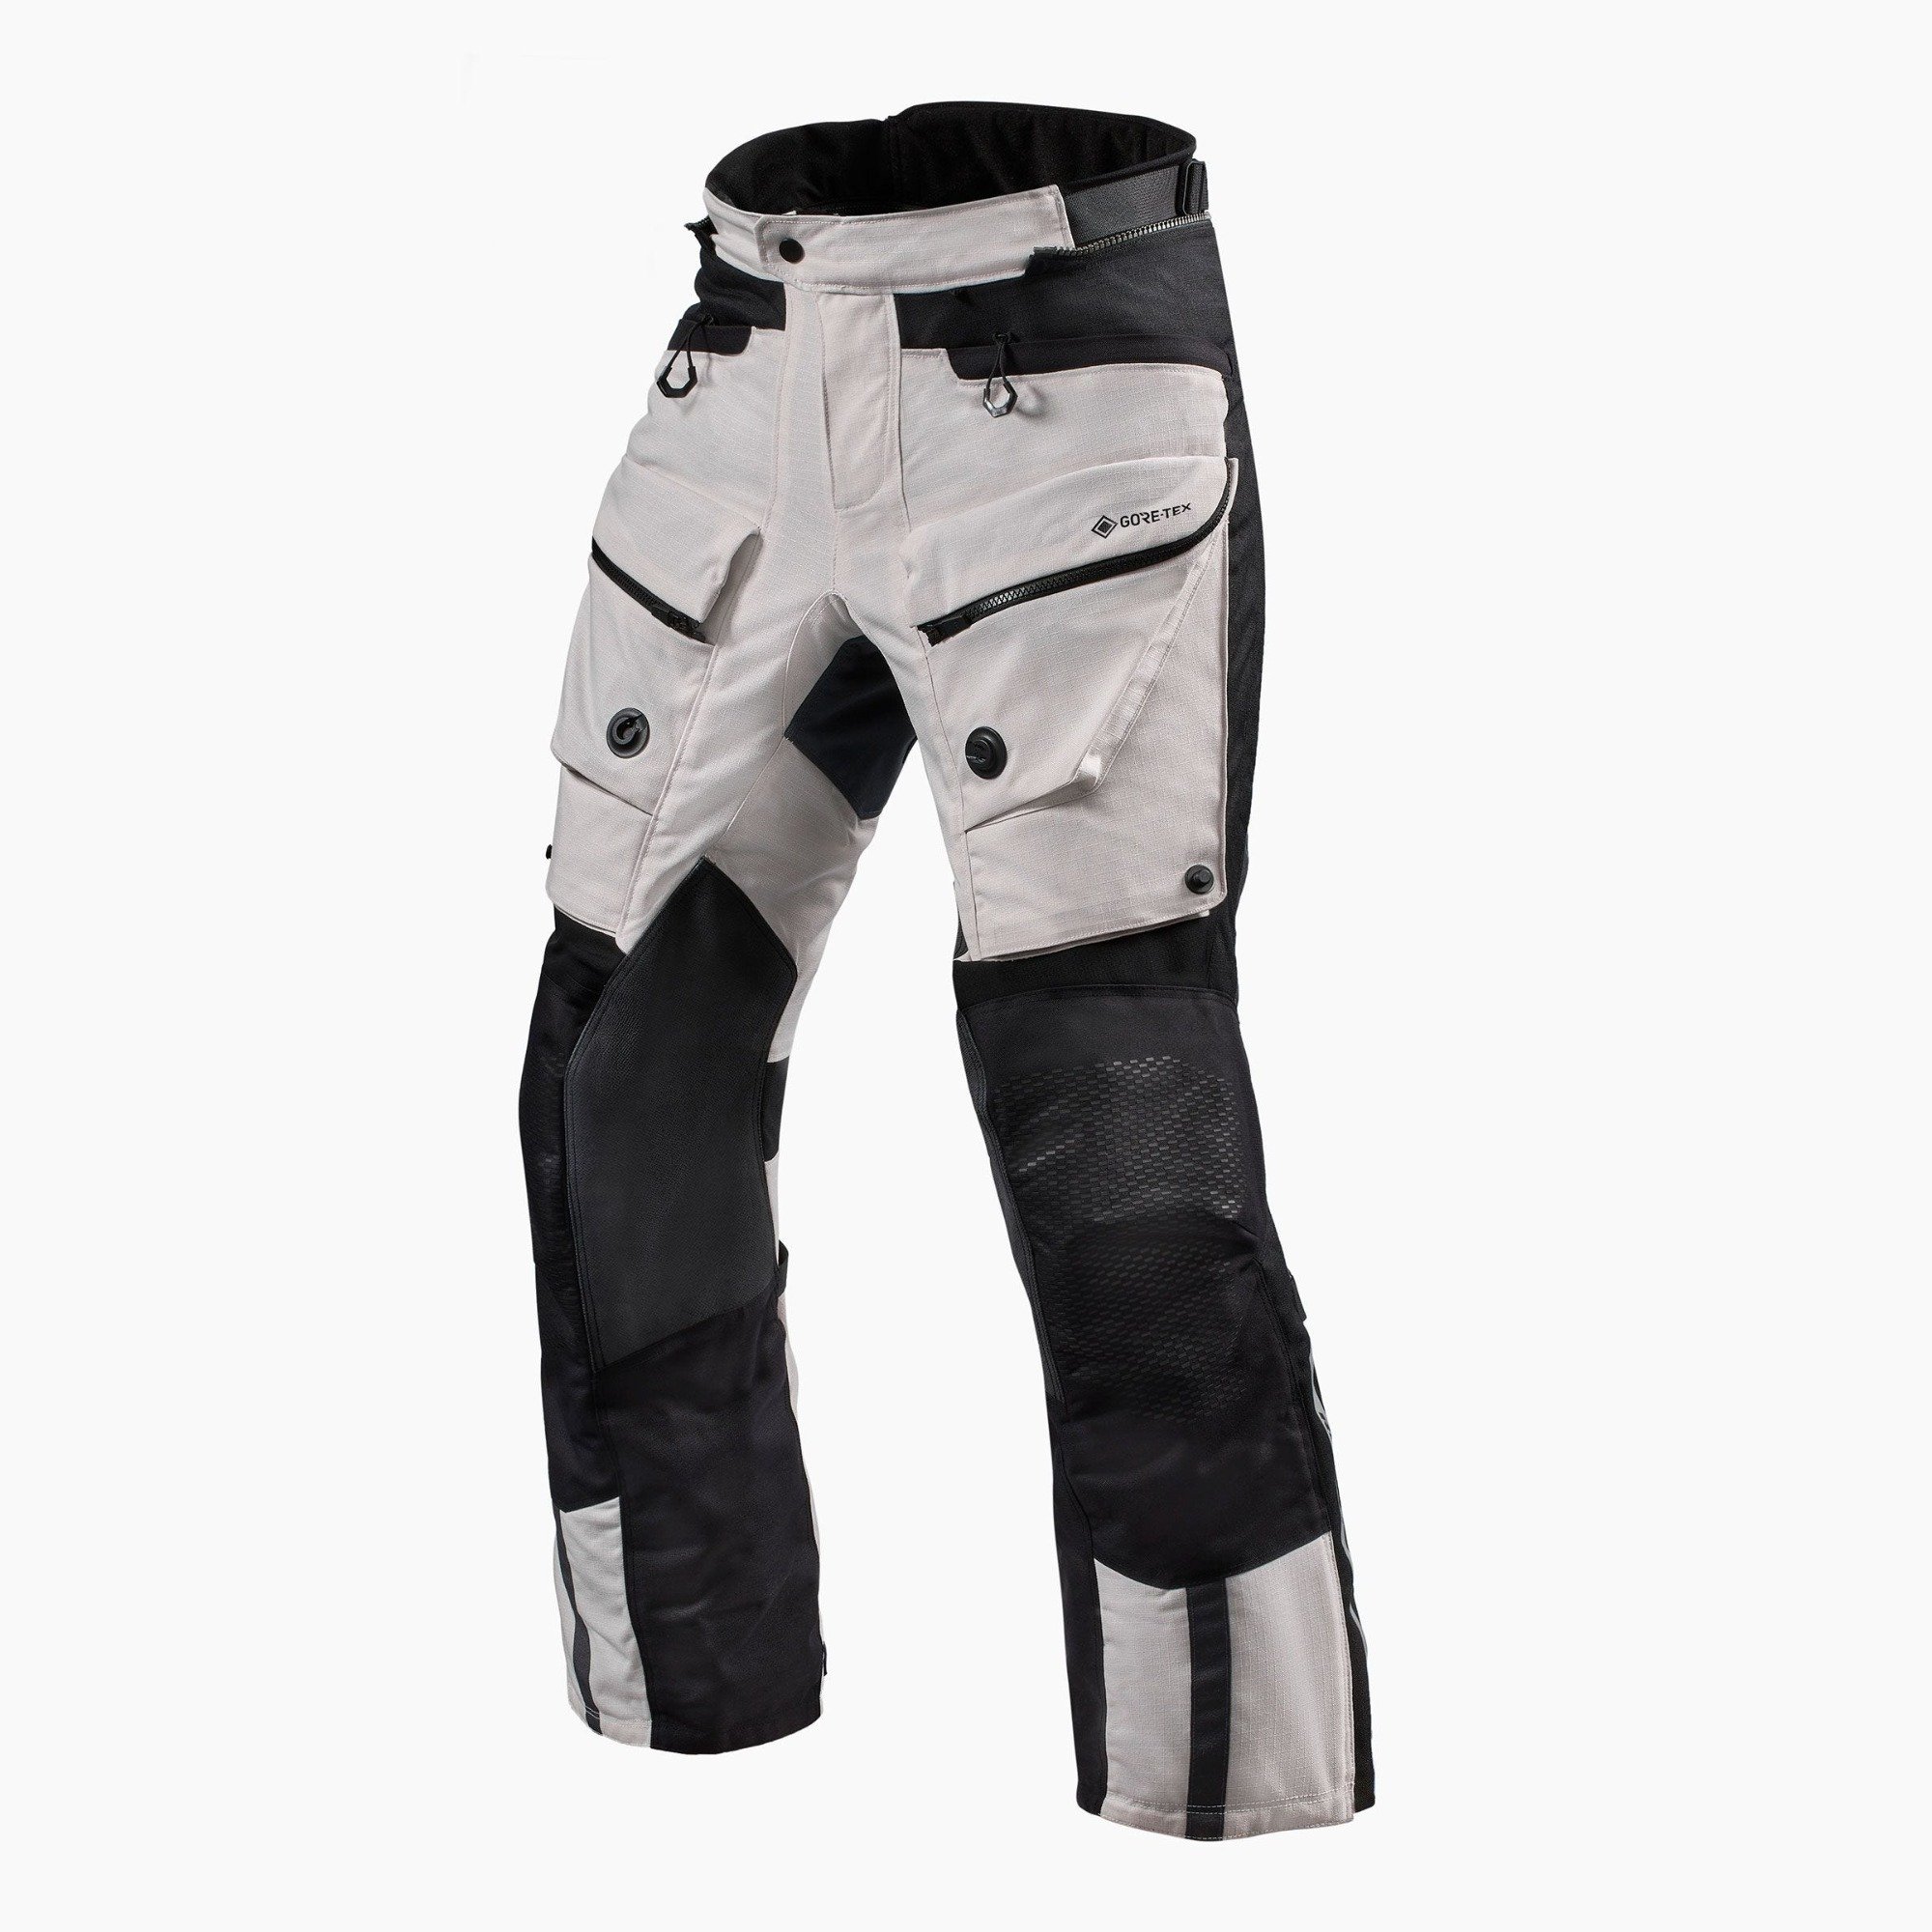 Image of REV'IT! Trousers Defender 3 GTX Silver Black Standard Motorcycle Pants Size 2XL ID 8700001319973